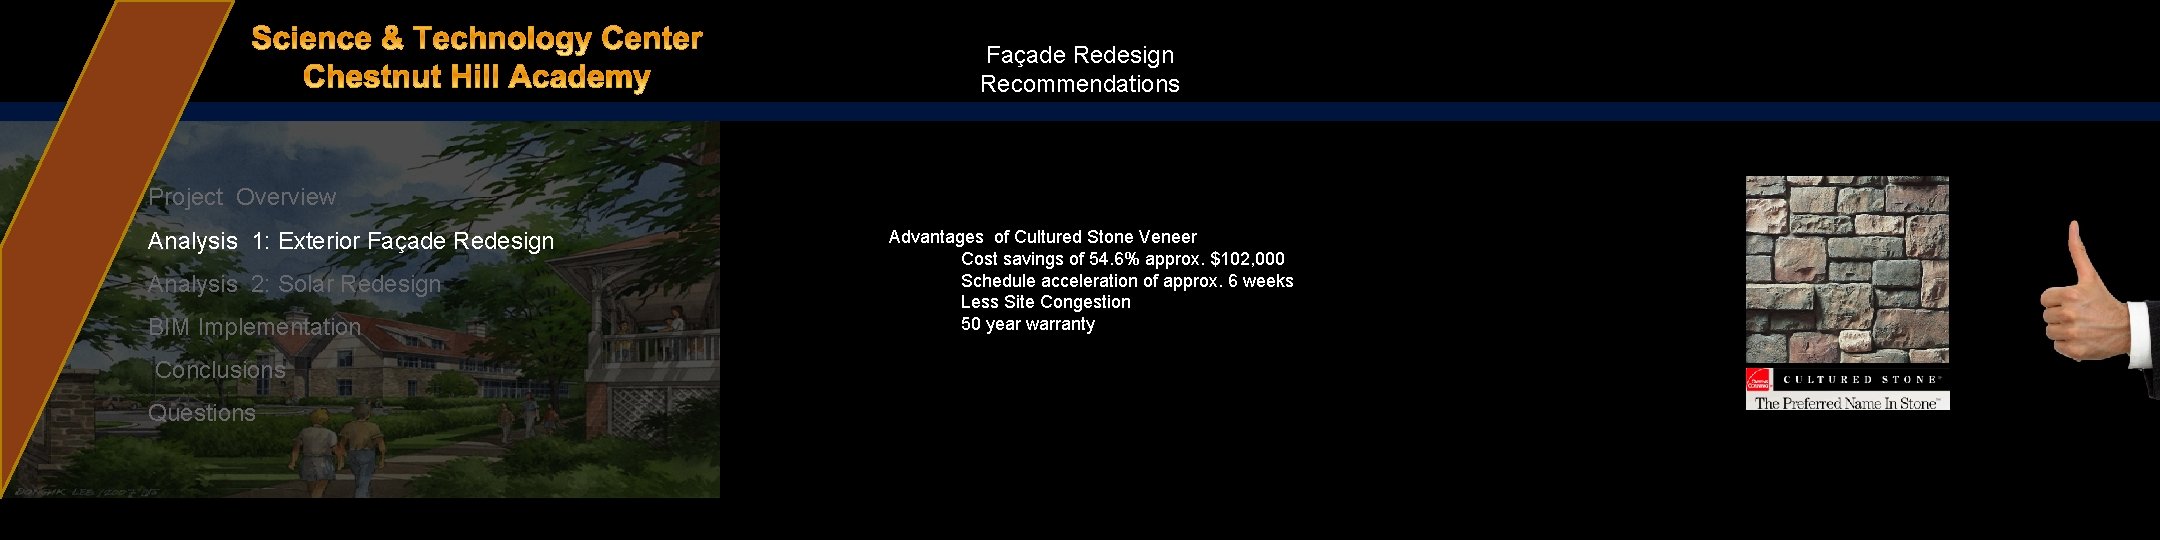 Façade Redesign Recommendations Project Overview Analysis 1: Exterior Façade Redesign Analysis 2: Solar Redesign